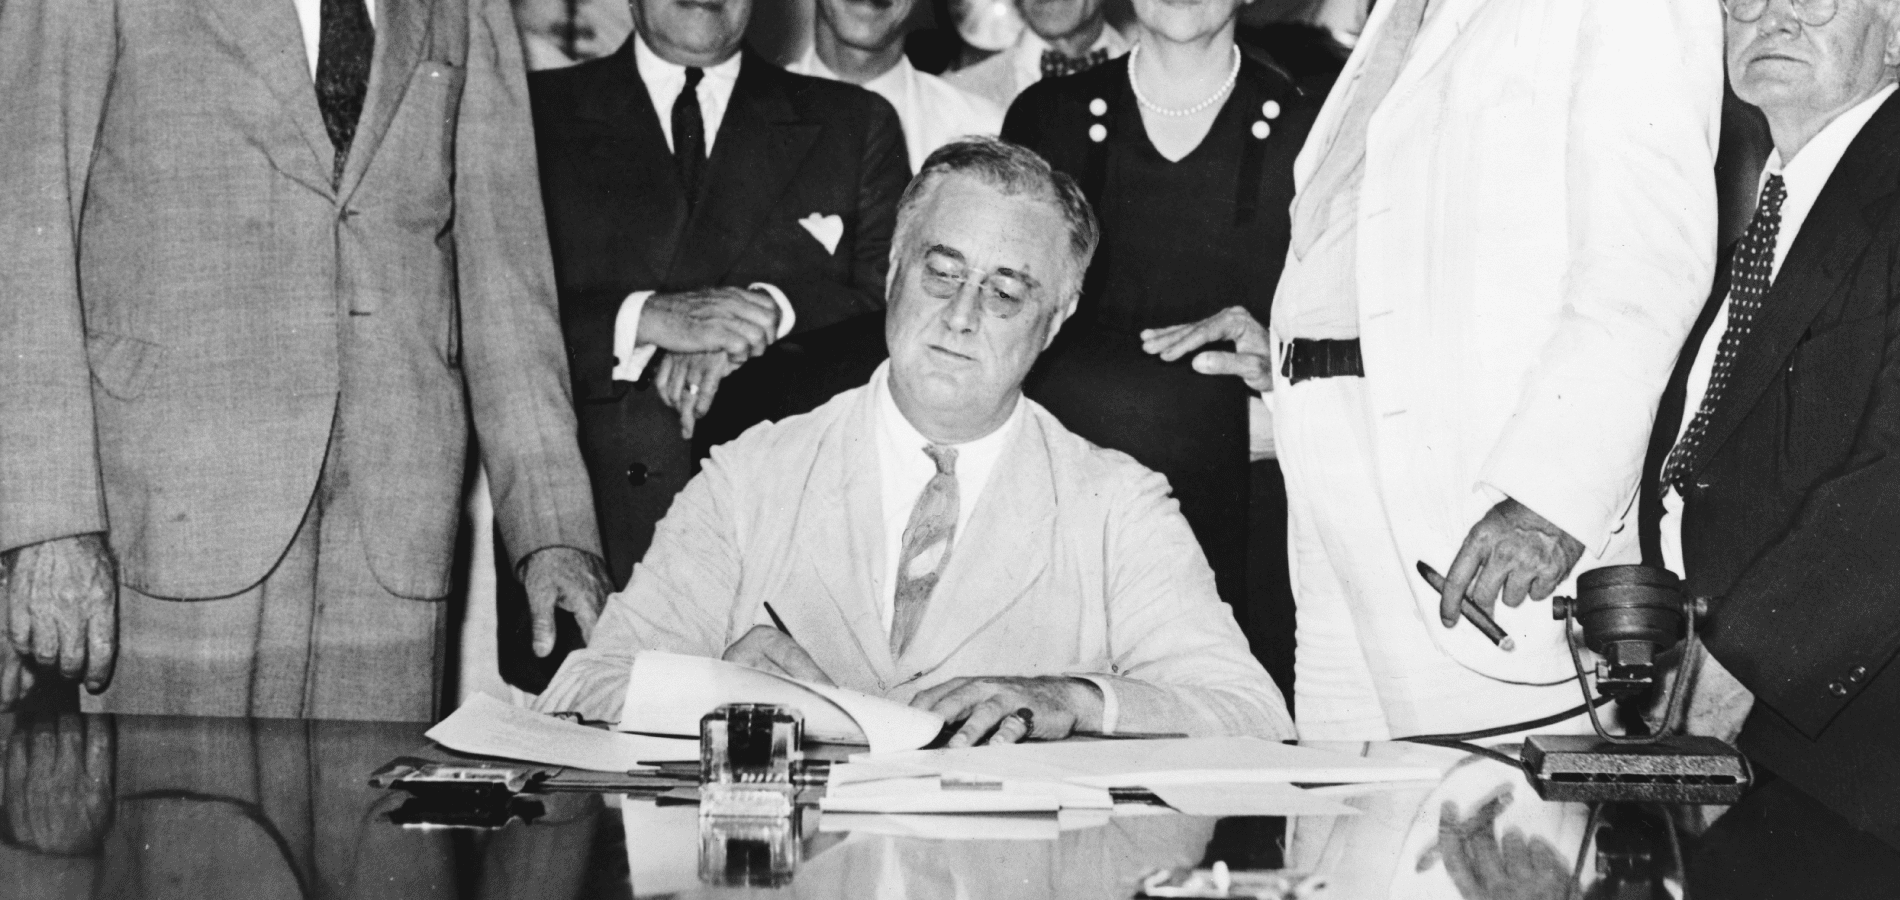 Roosevelt signing the Social Security Act